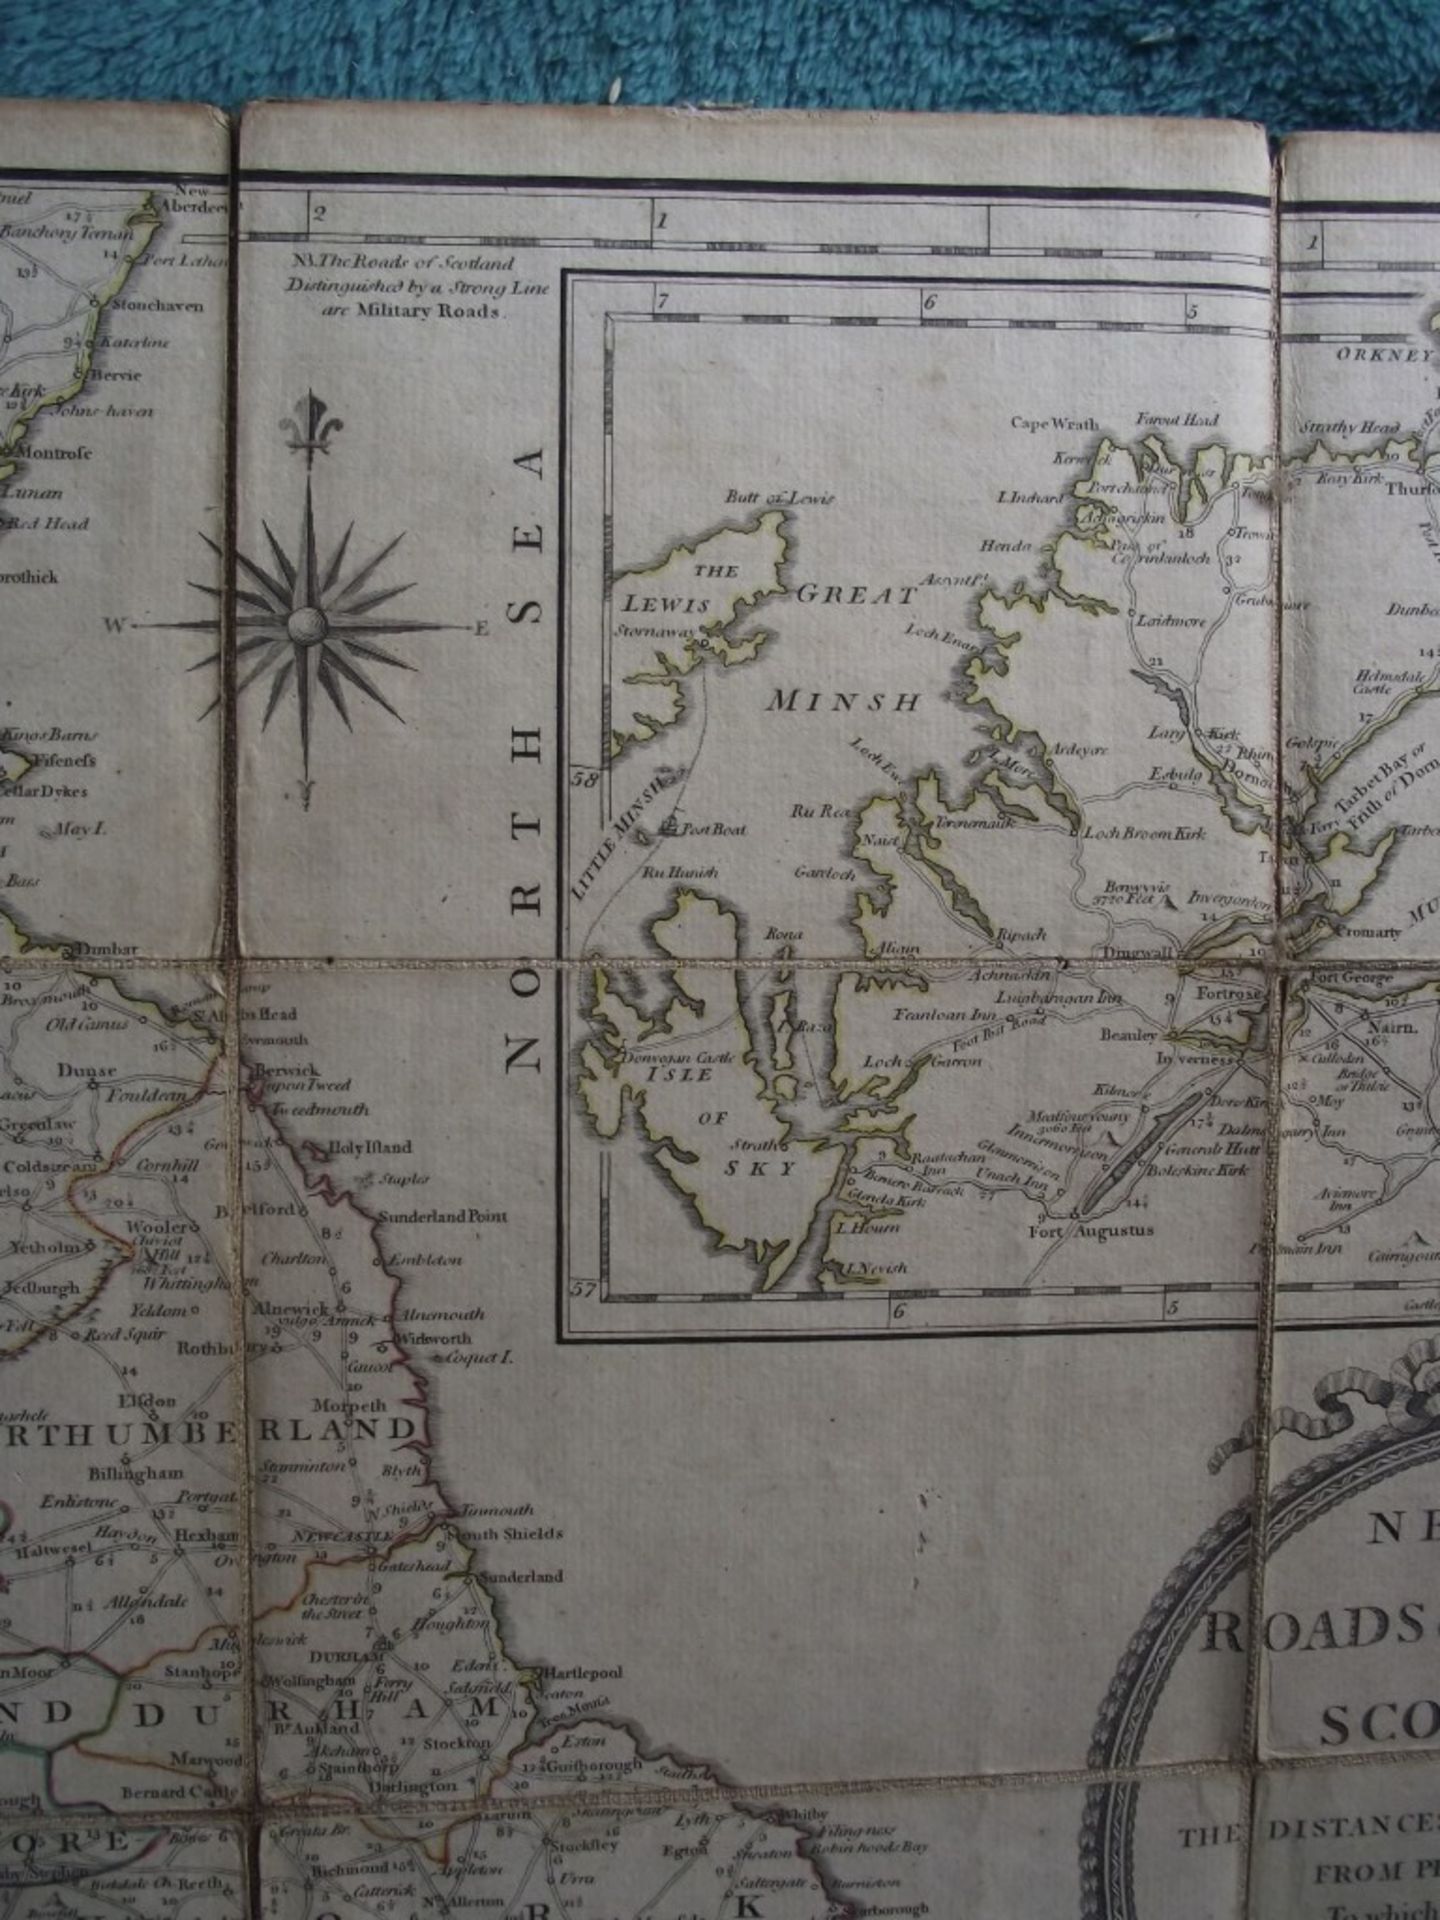 A New Map of the Roads of Ireland and Scotland - by Laurie & Whittle - 12th May 1794 - Original c... - Image 8 of 31